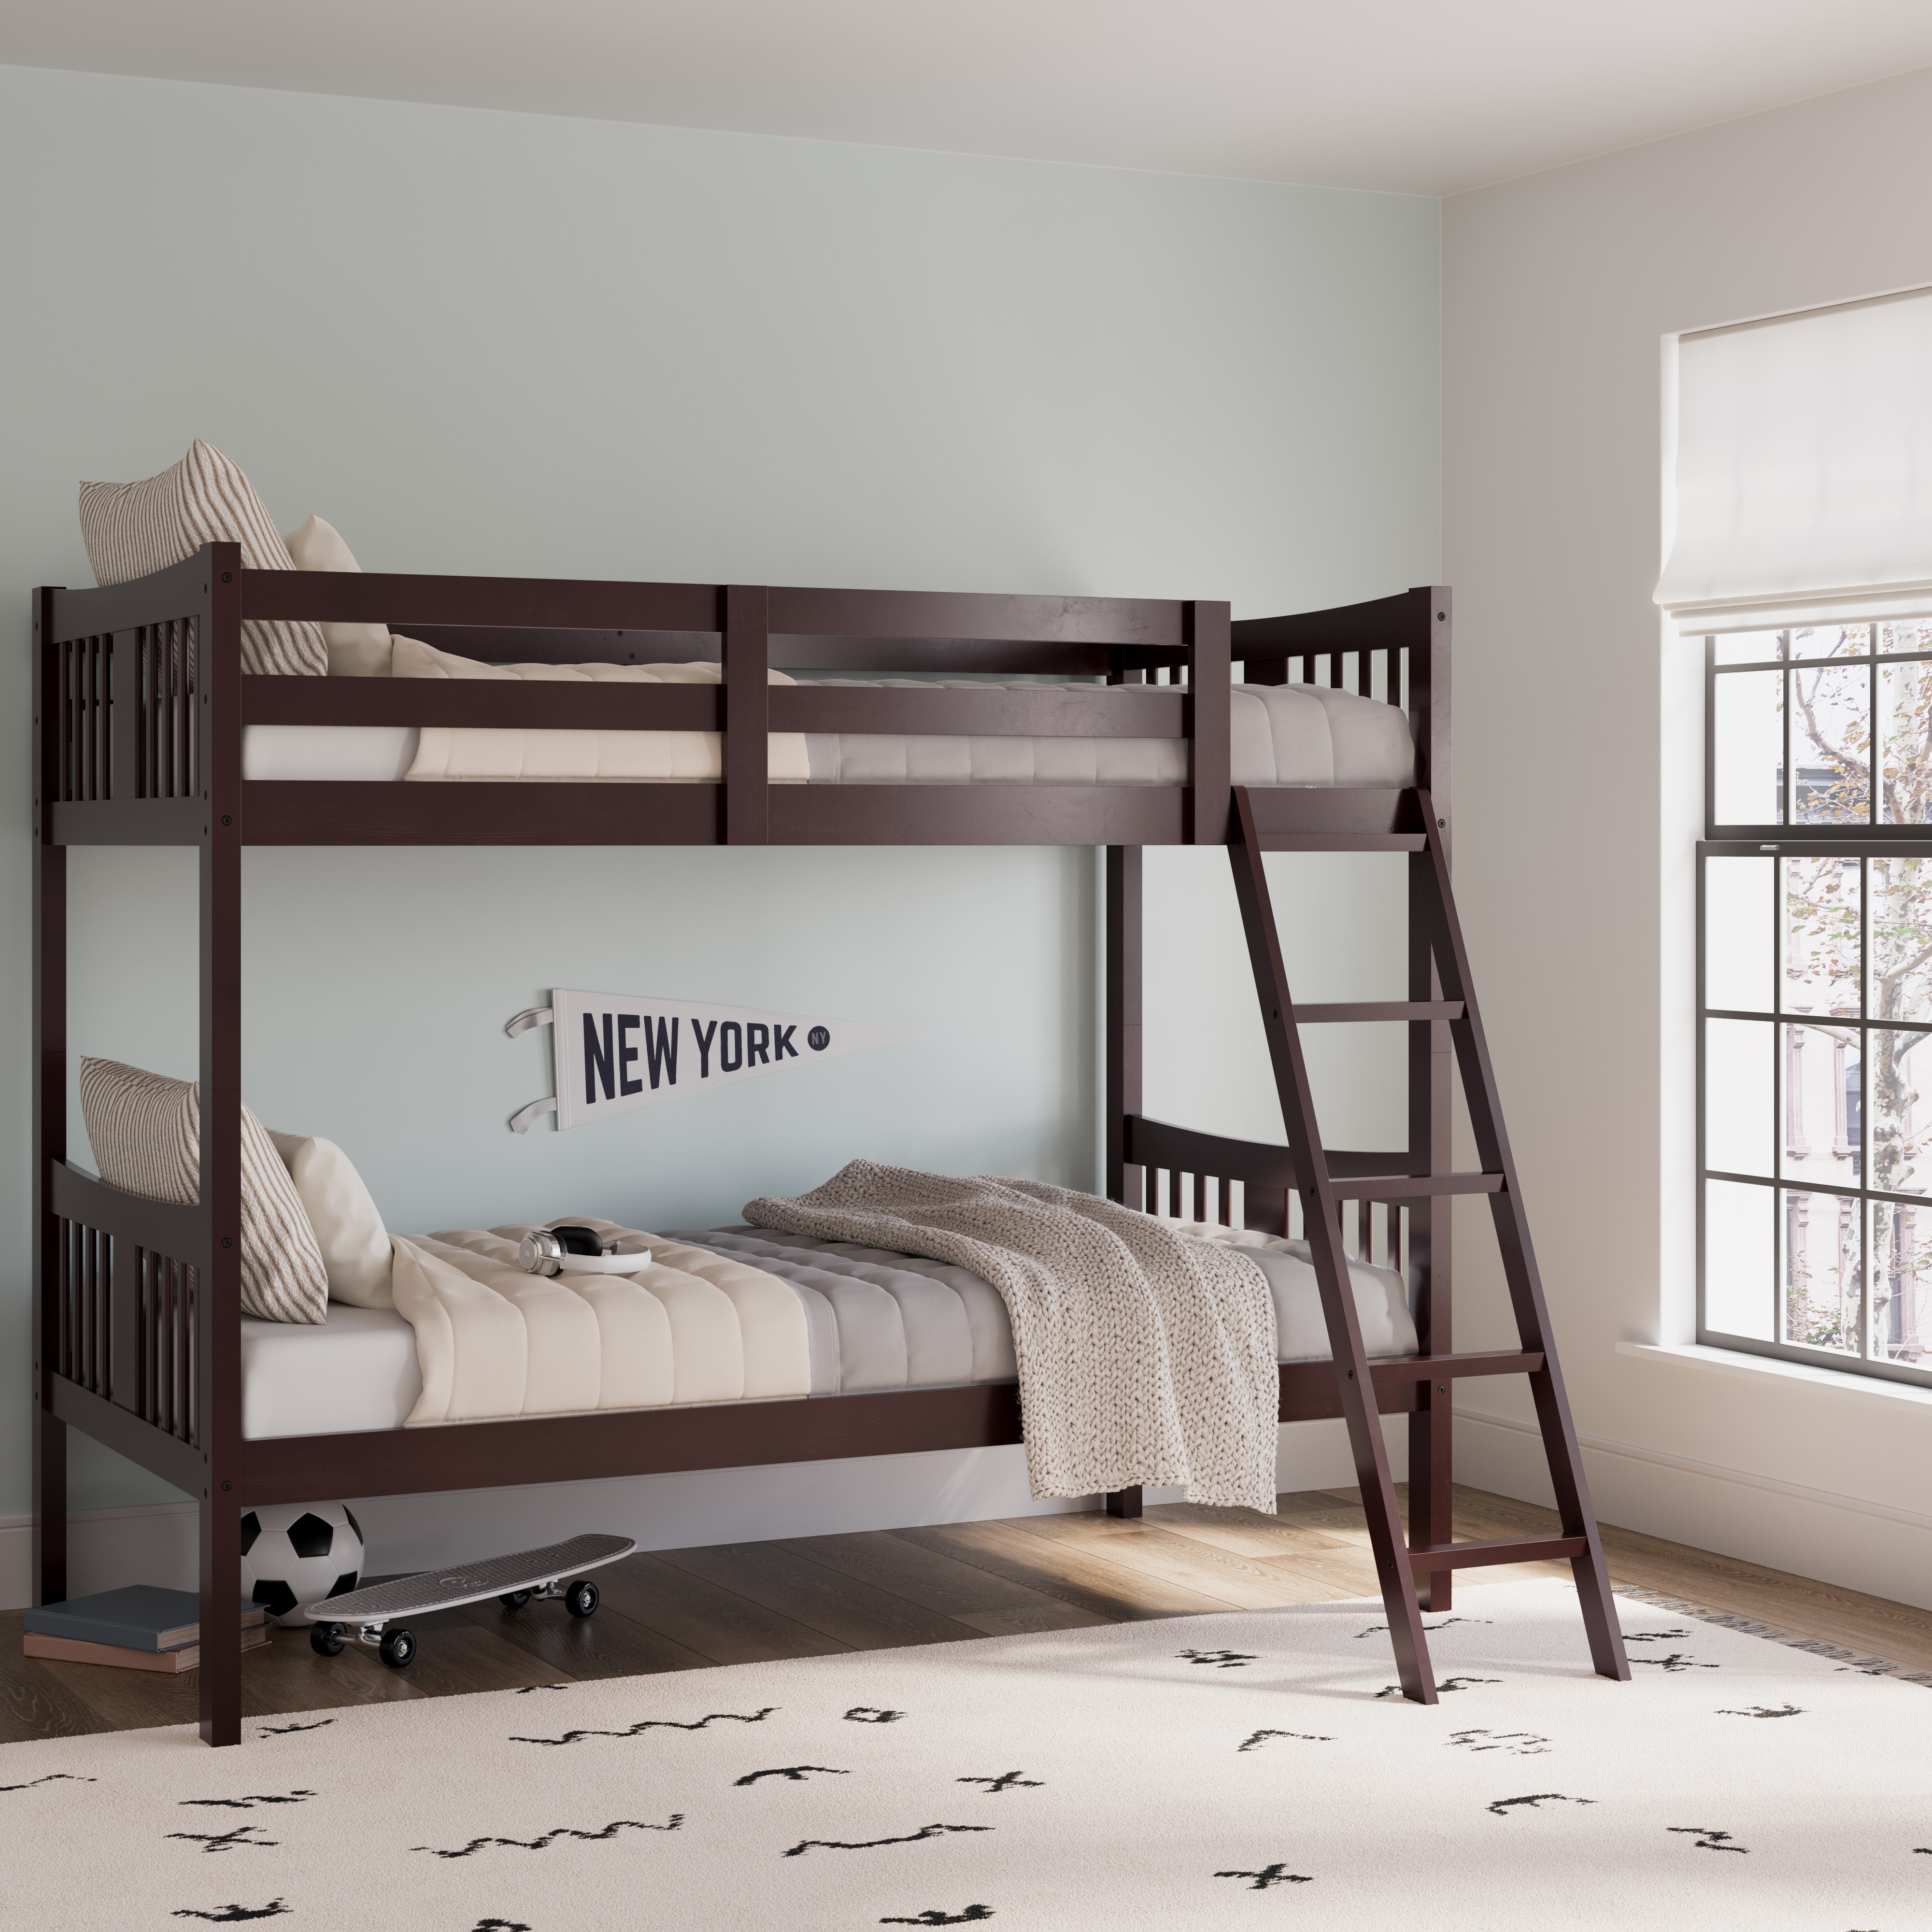 Storkcraft Caribou Twin over Twin Bunk Bed, Espresso - image 1 of 11